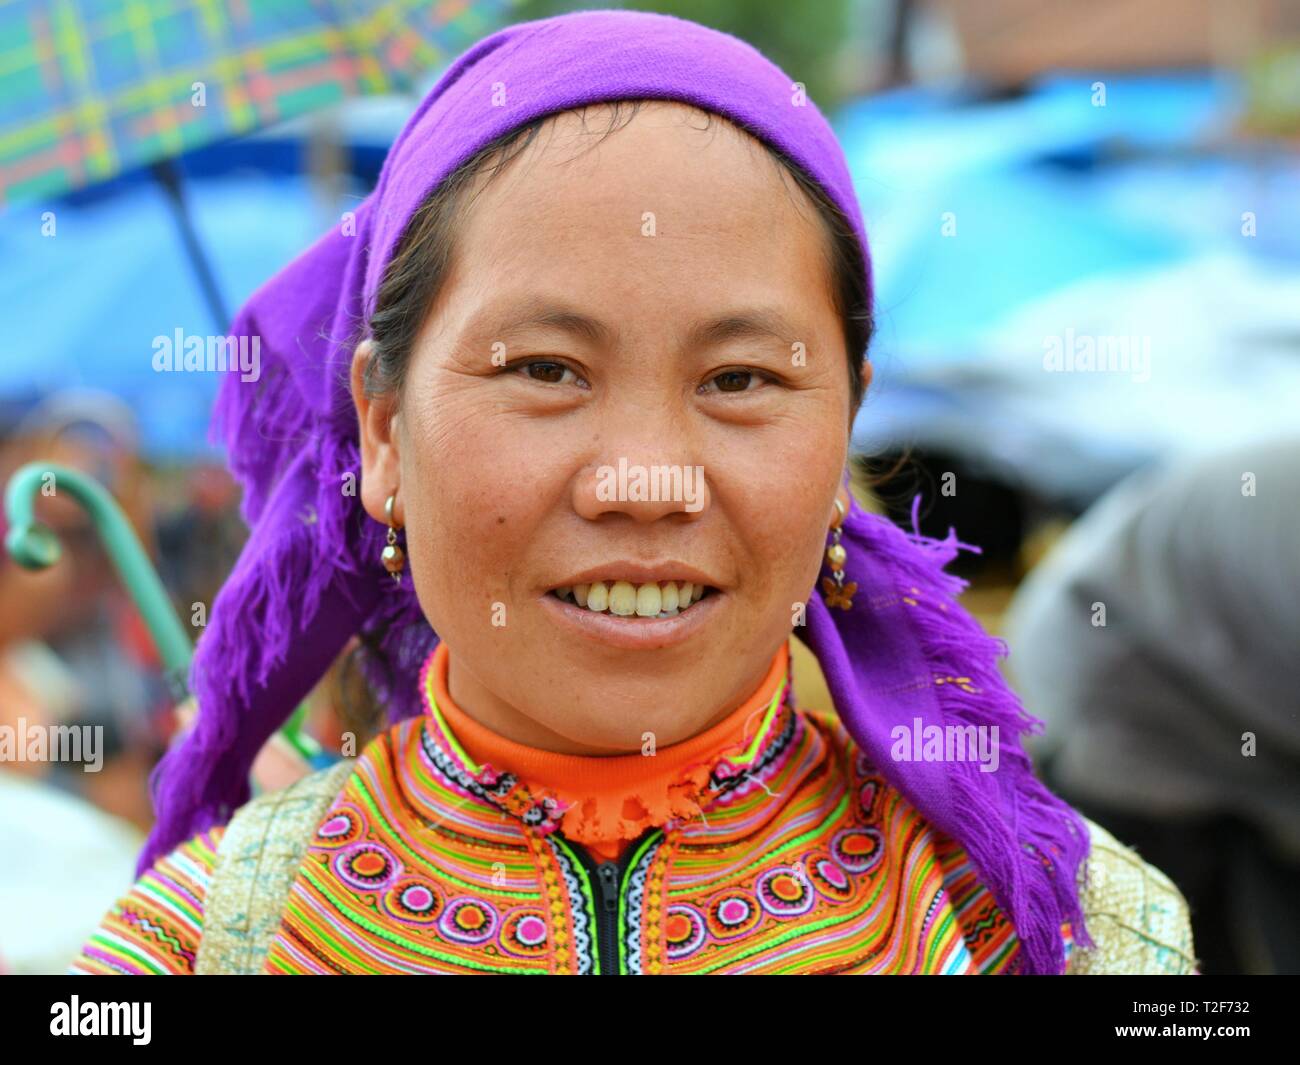 Mature Vietnamese Flower H'mong woman wears the colourful traditional costume of the Flower H'mong people, a blue headscarf and small earrings. Stock Photo